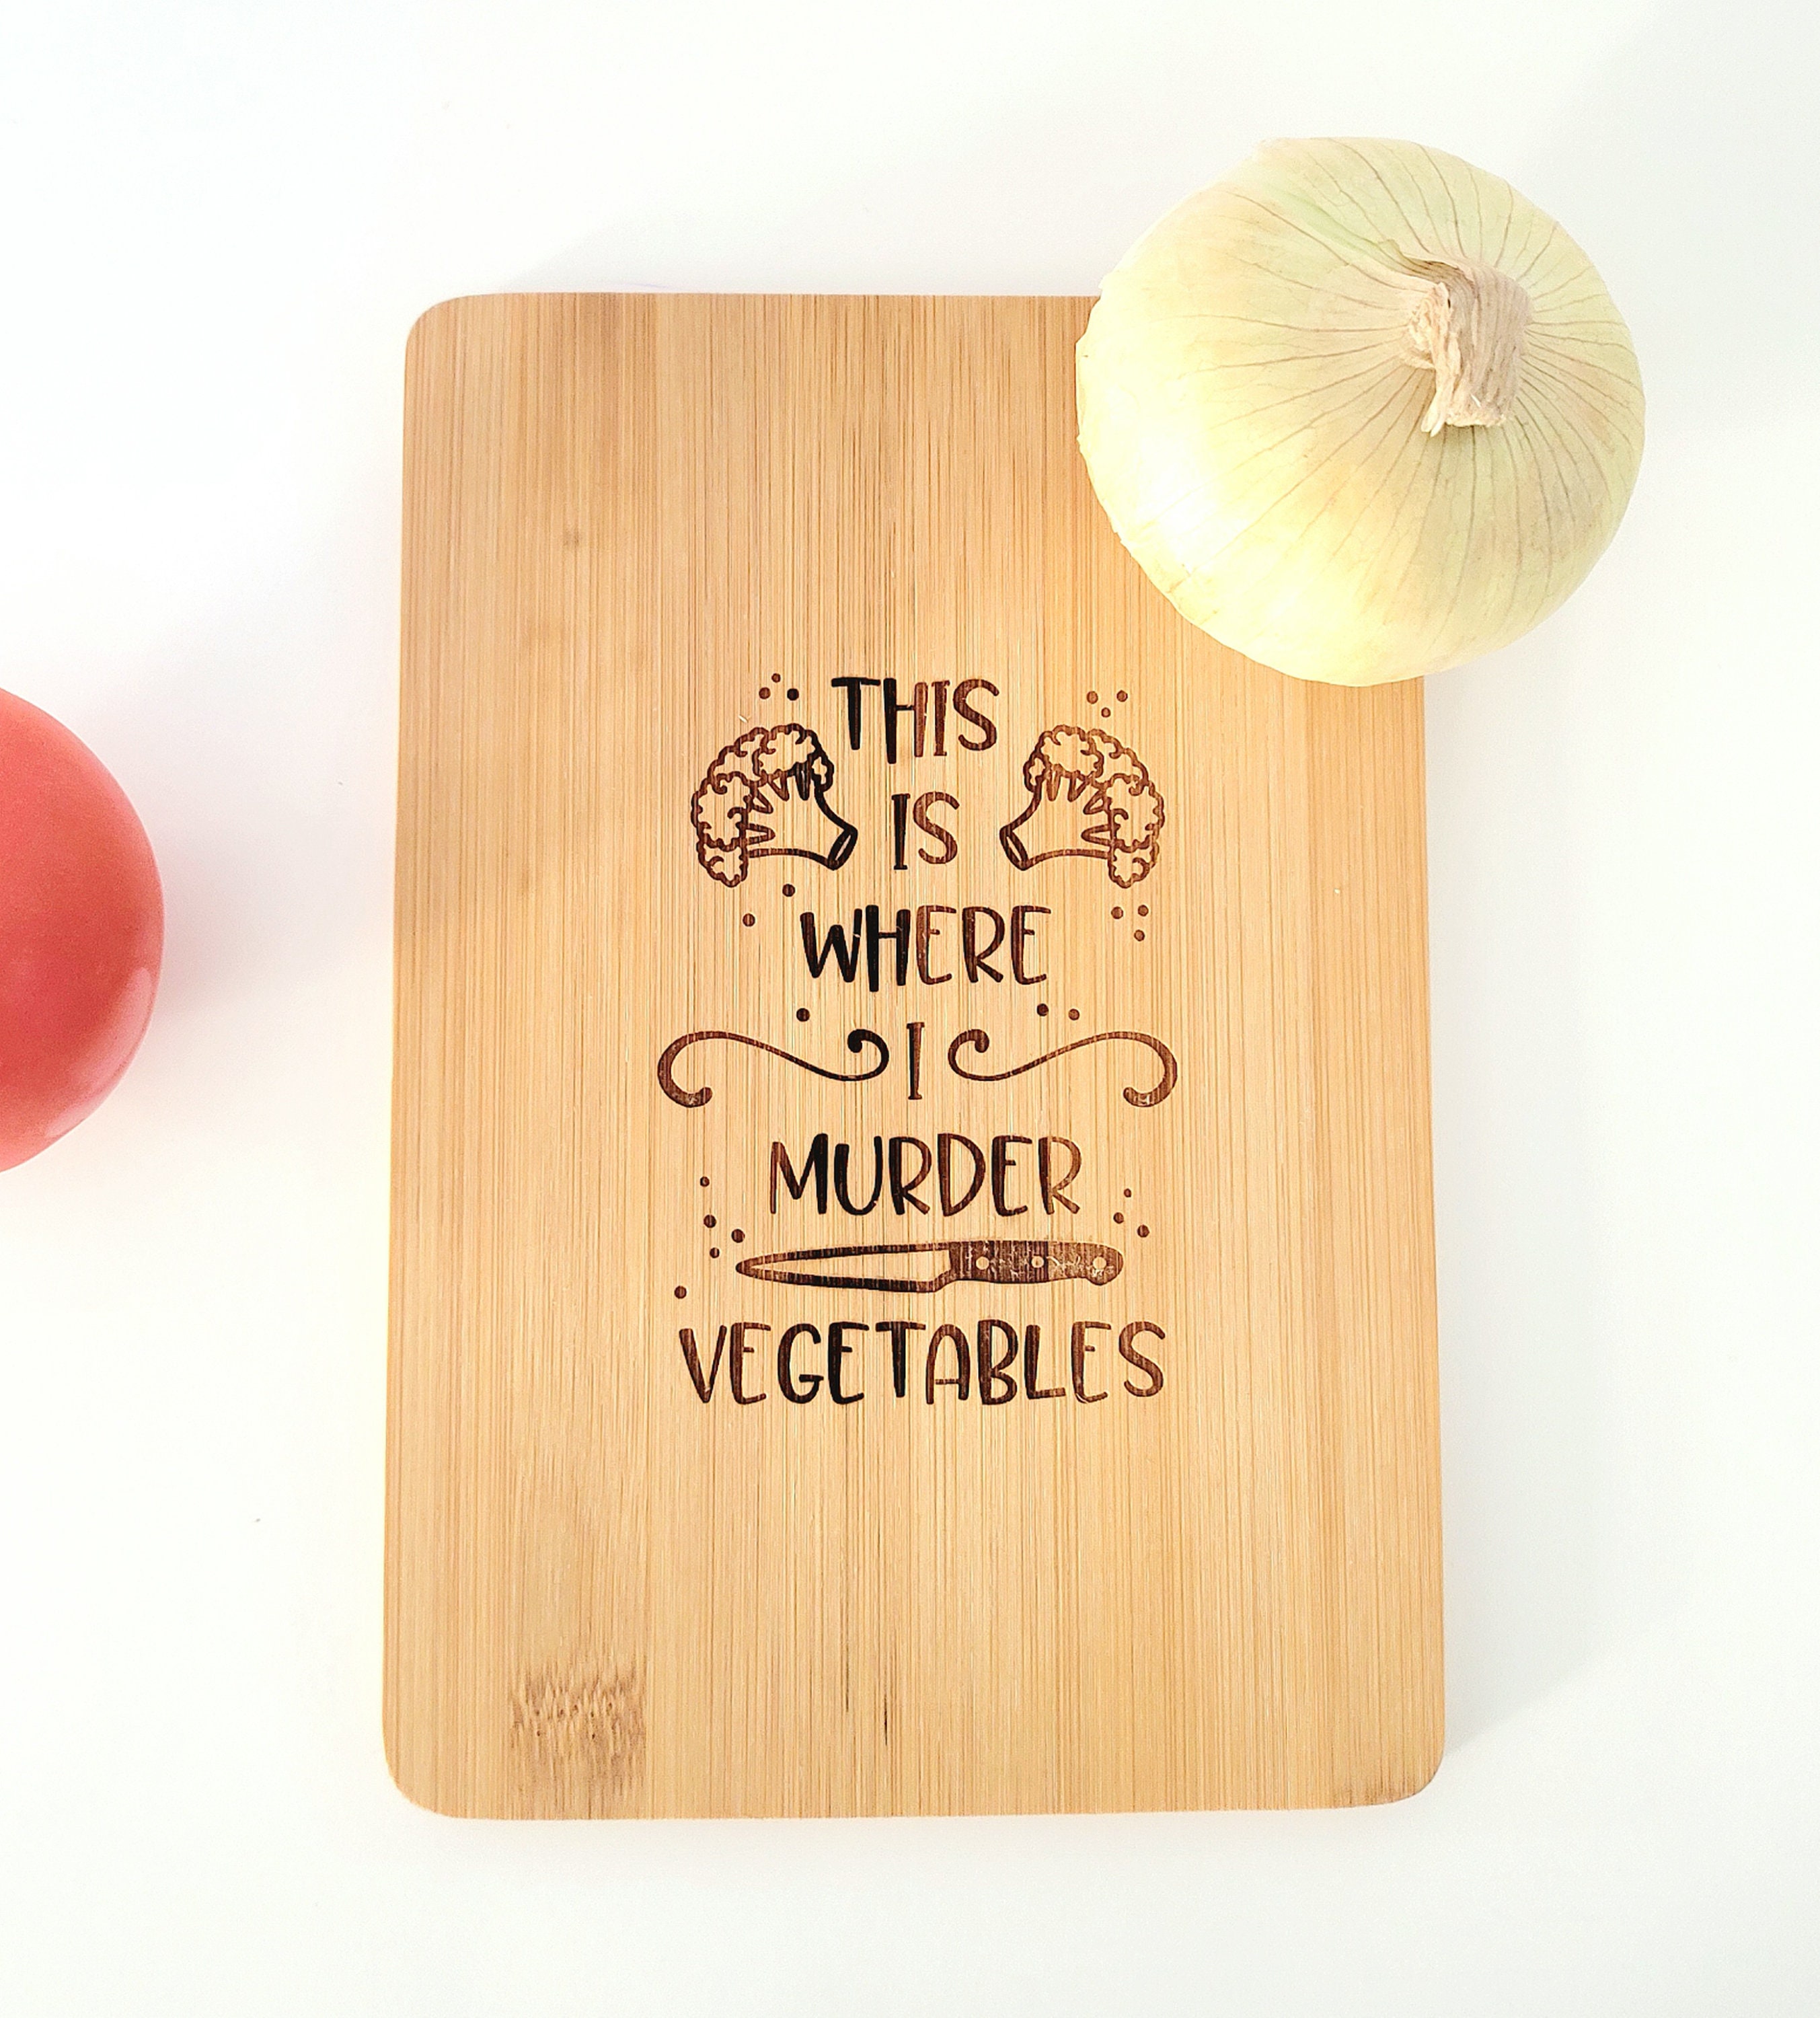 Multifunctional Vegetable Rectangle Wood Stone Cutting Board with